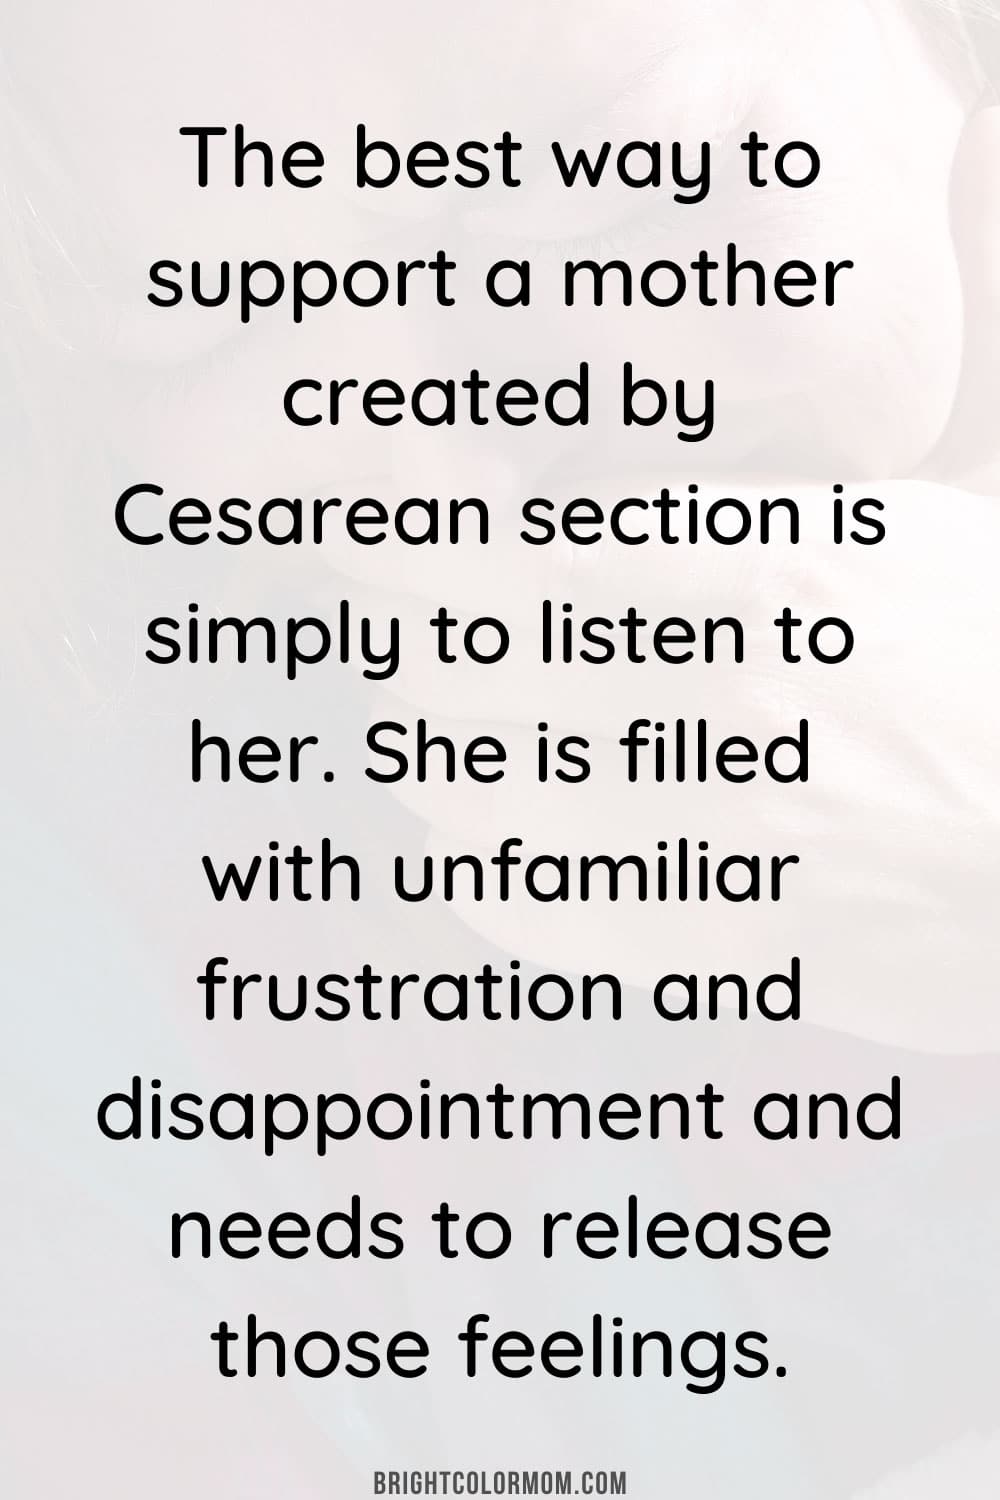 The best way to support a mother created by Cesarean section is simply to listen to her. She is filled with unfamiliar frustration and disappointment and needs to release those feelings.